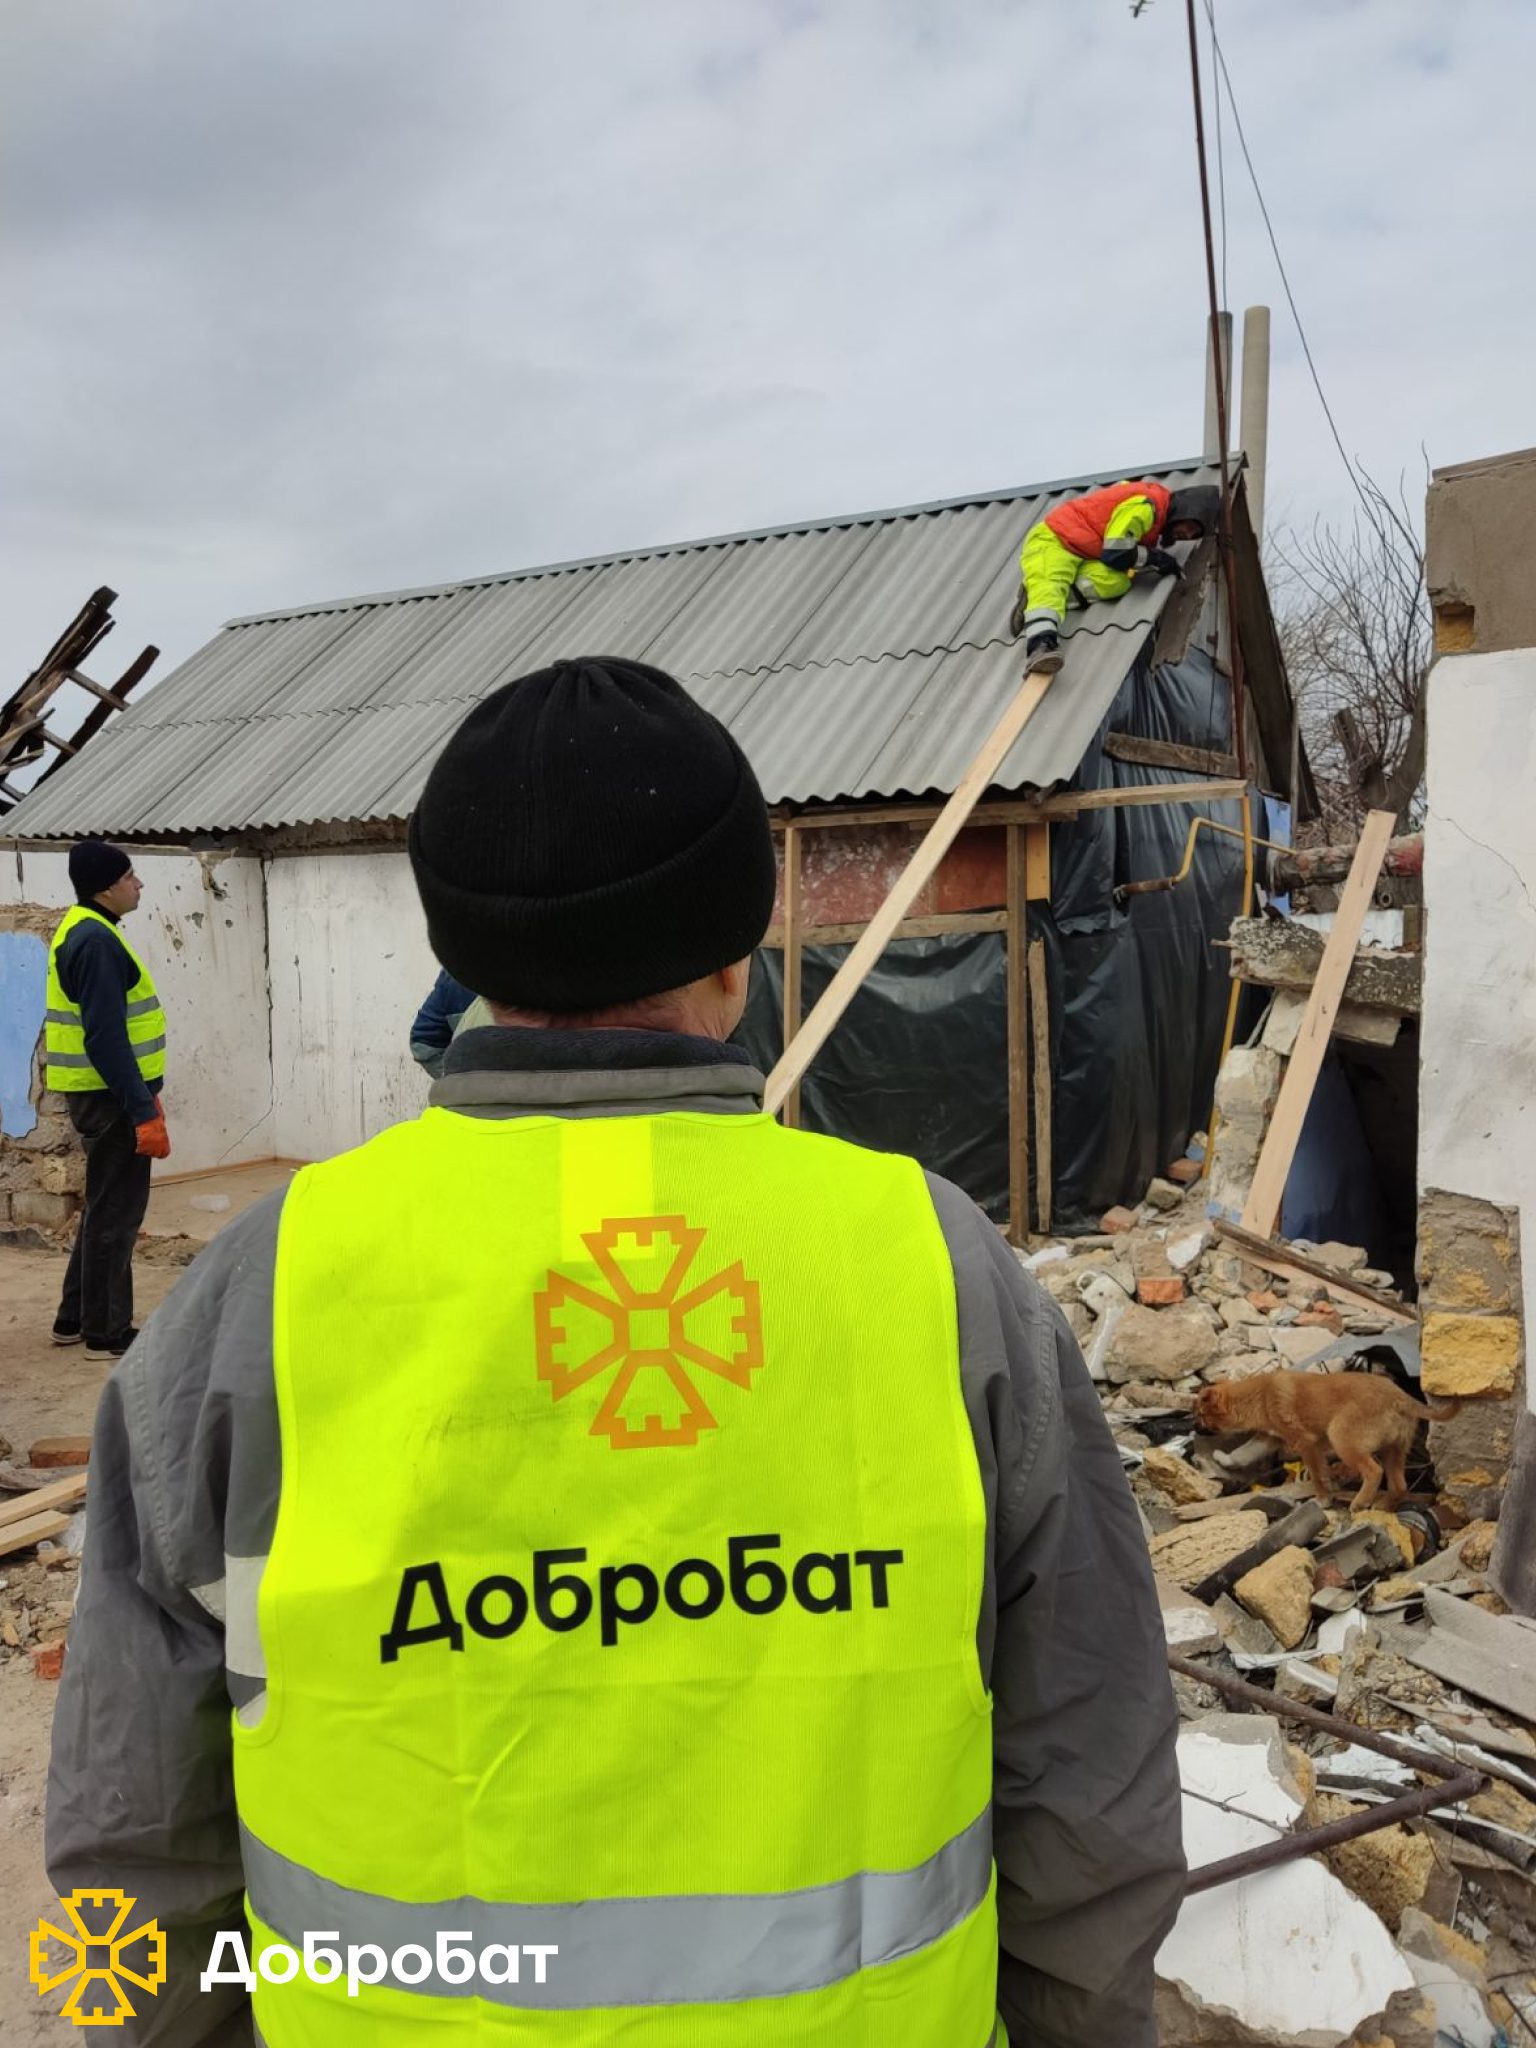 Four regions, 18 site visits, and 175 volunteers involved: Dobrobat reports on a week of reconstruction